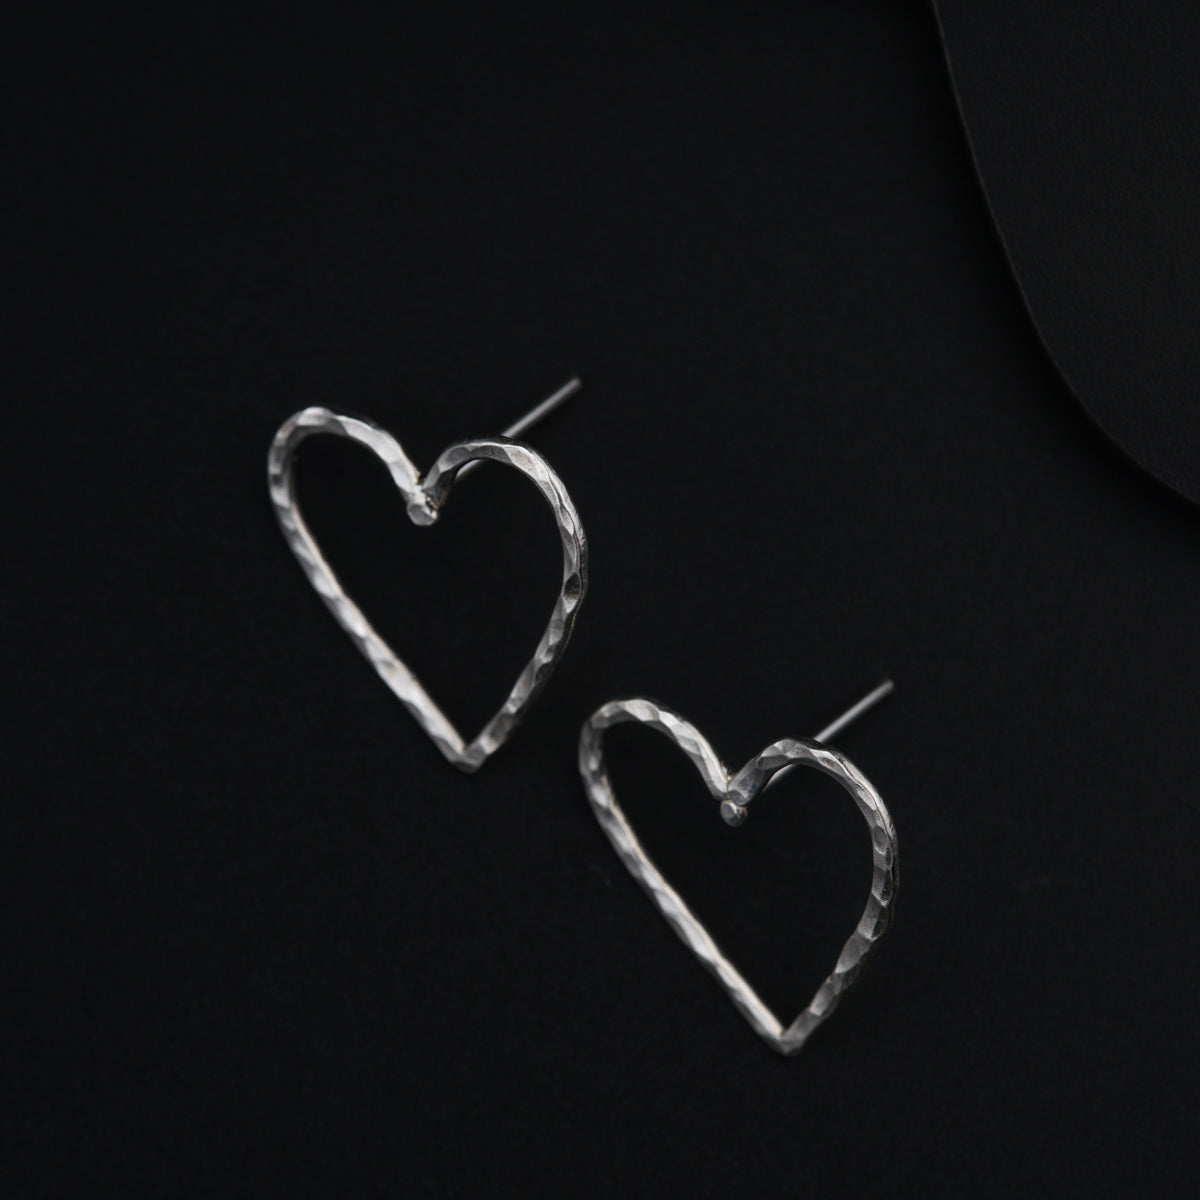 a pair of heart shaped earrings on a black background